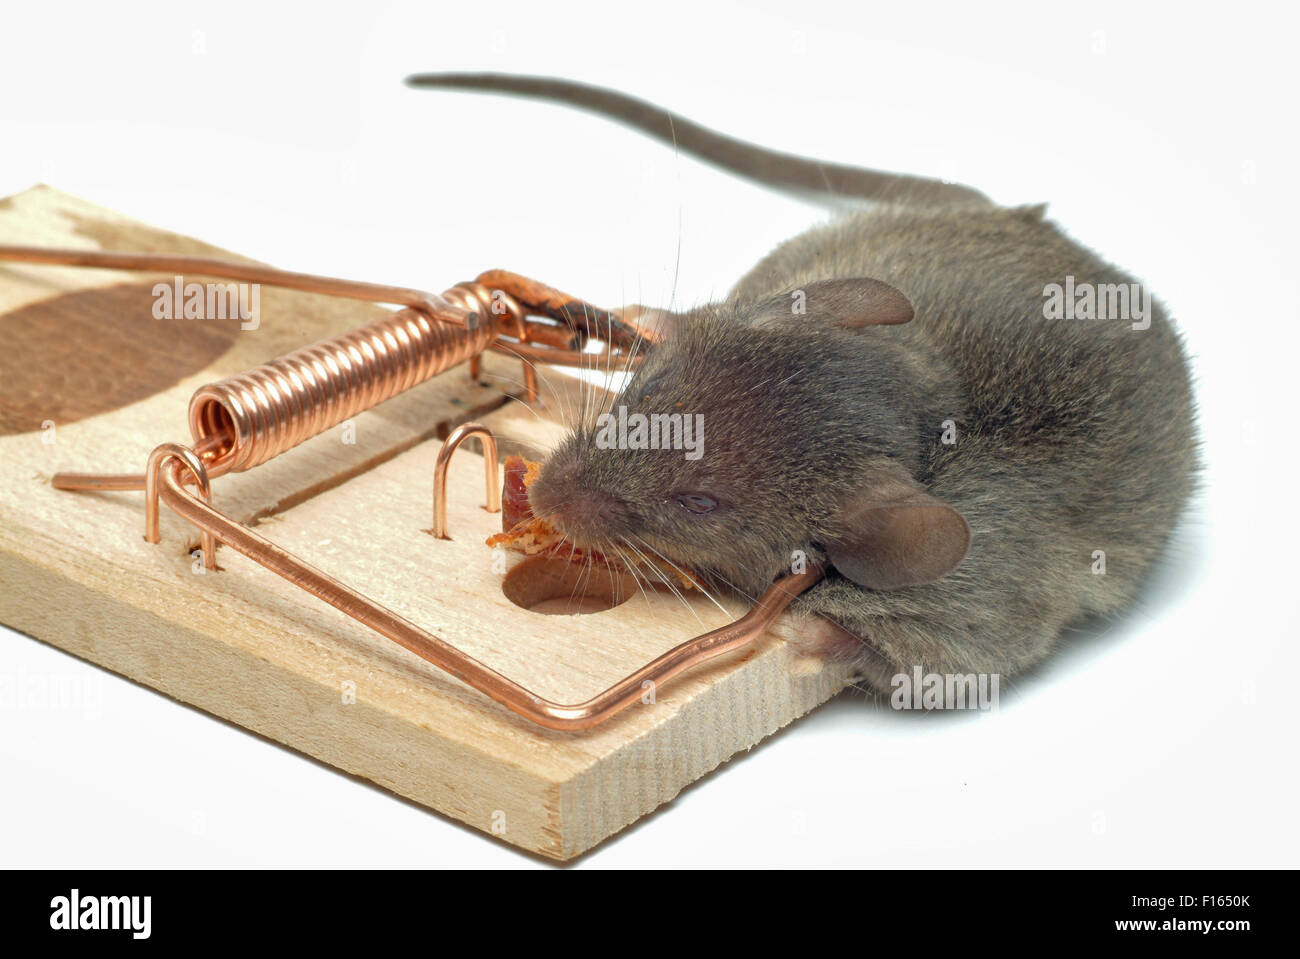 https://c8.alamy.com/comp/F1650K/mouse-in-a-mousetrap-killed-F1650K.jpg